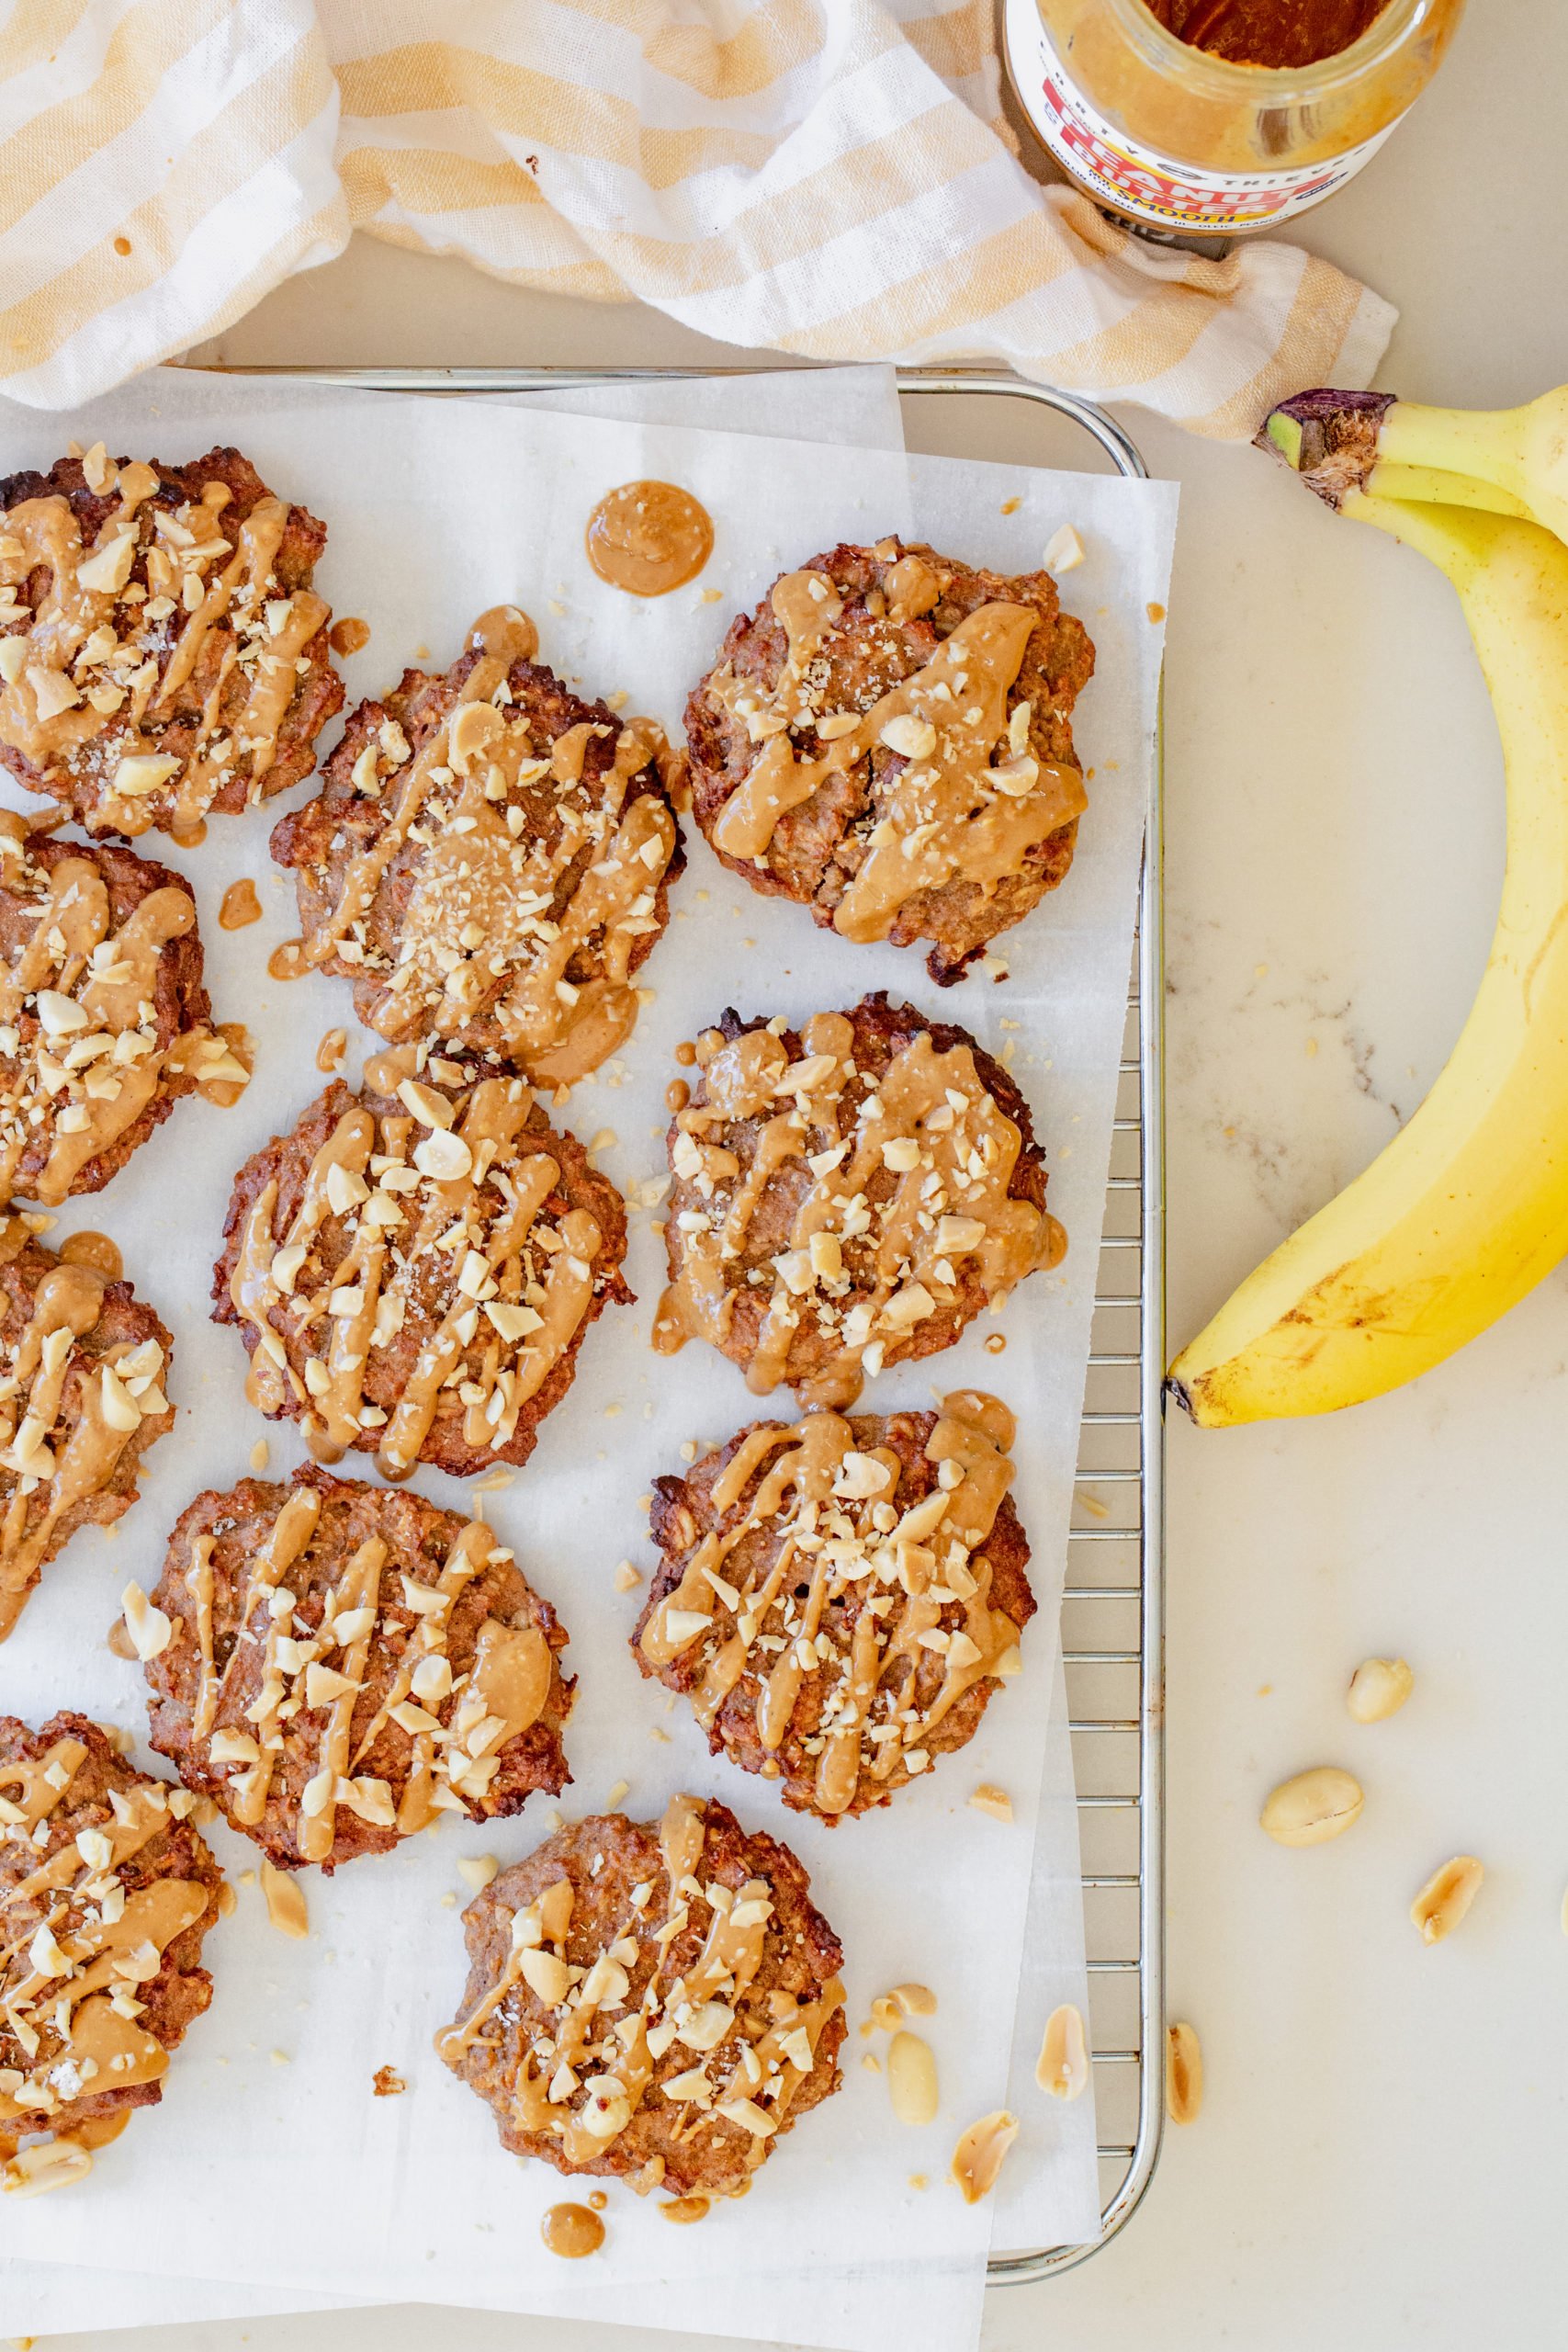 Top down of banana peanut butter breakfast cookies on tray